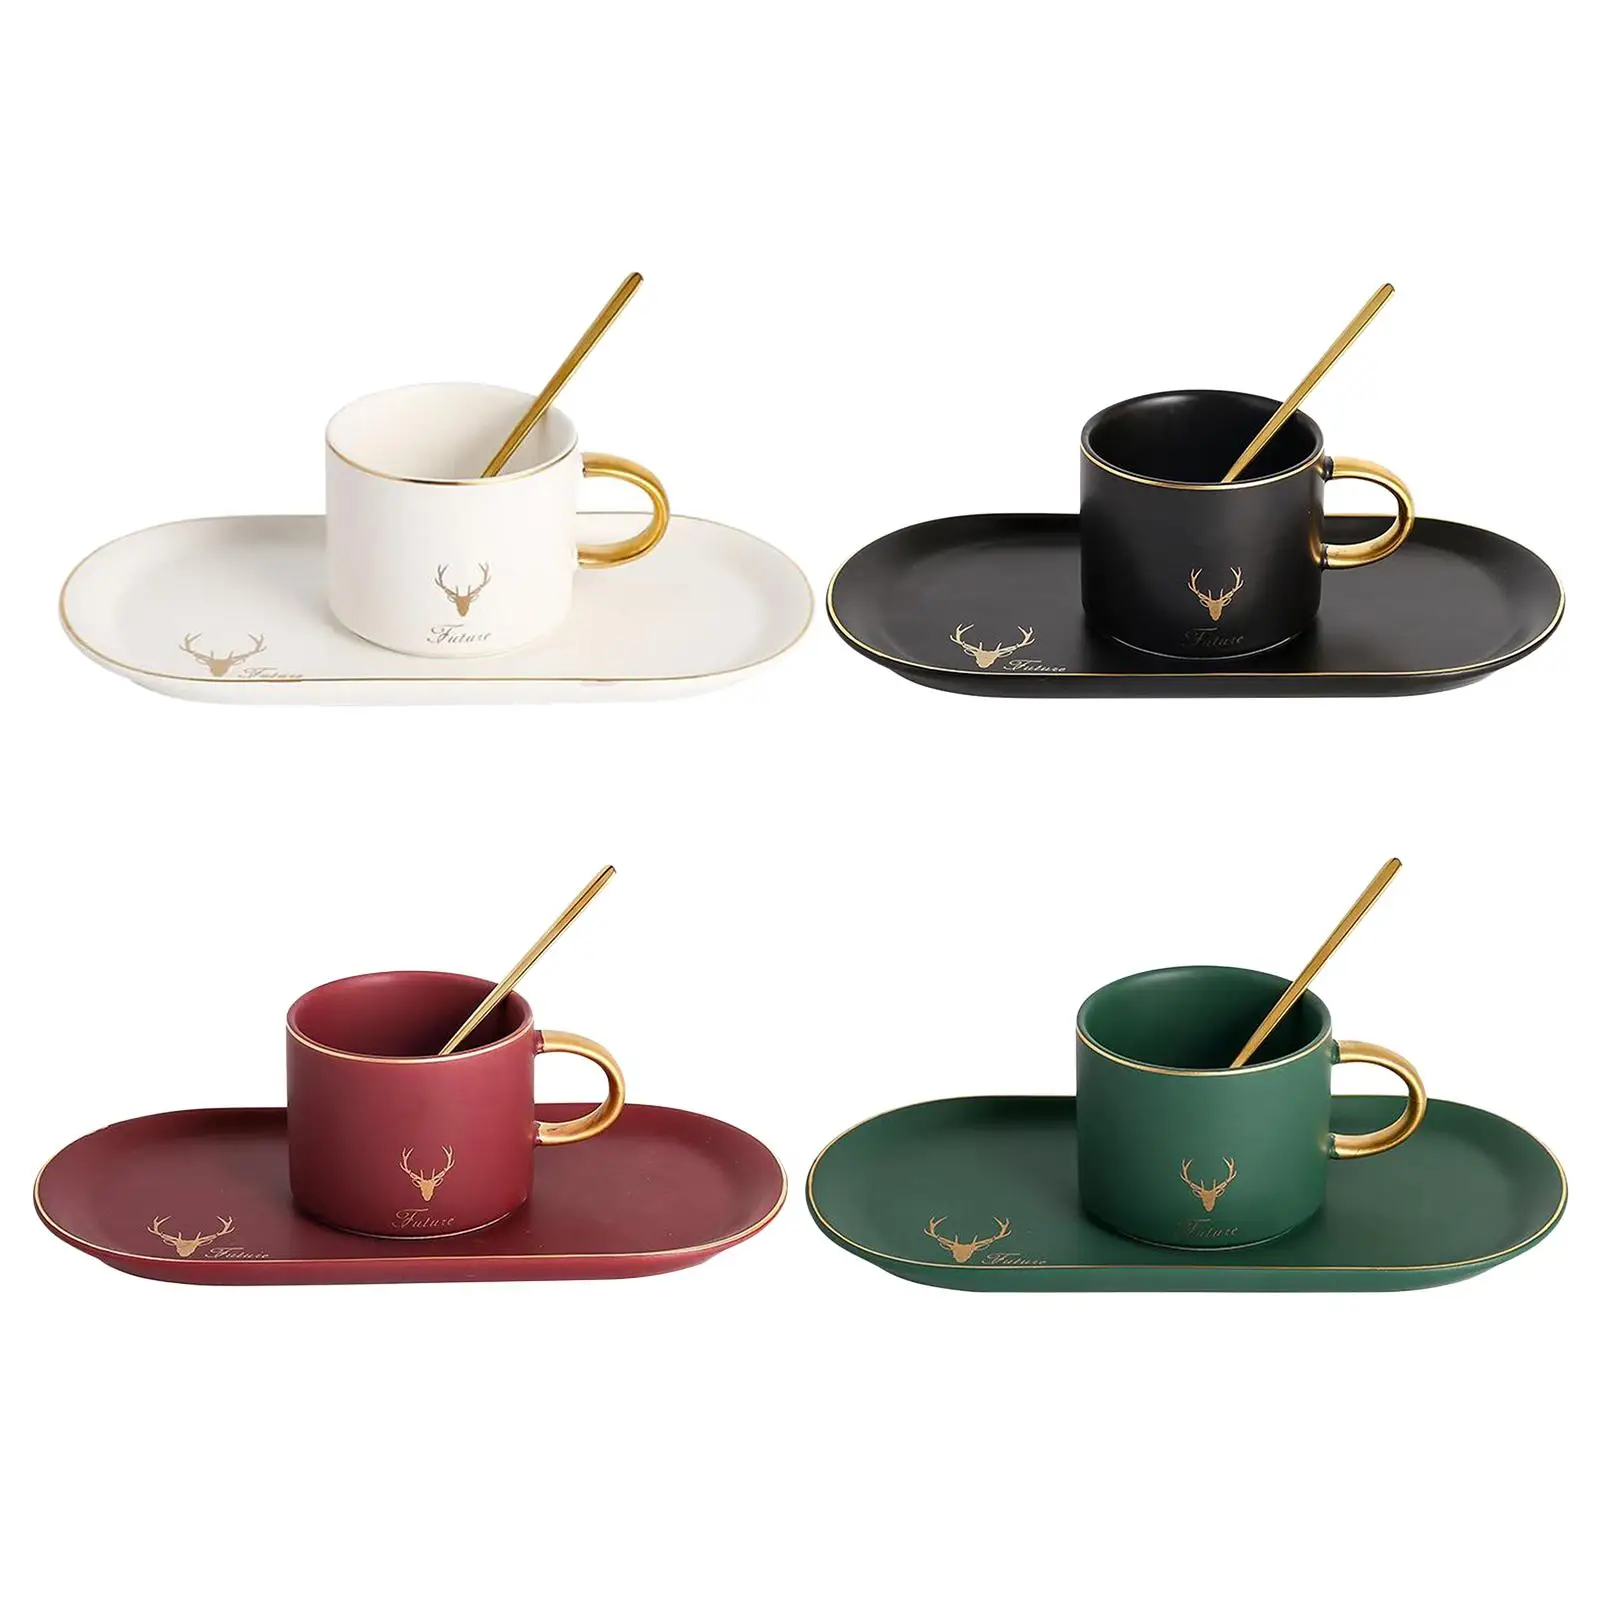 Ceramic Tableware Breakfast Coffee Cup Set inlcuding Saucer Tray and Spoon, Nordic Style